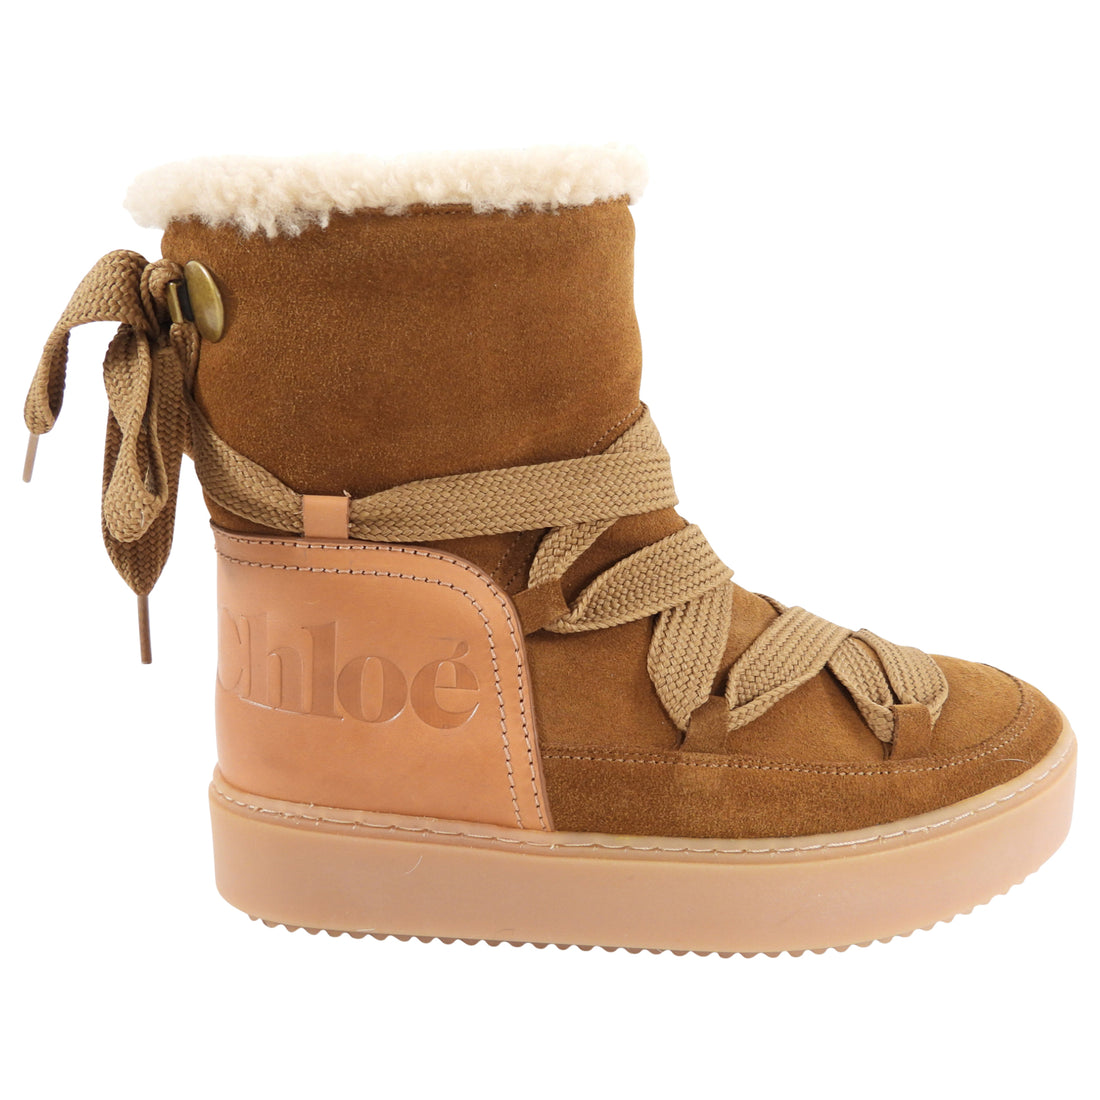 See by Chloe Tan Shearling Charlee Snow Boots - 6 / 6.5